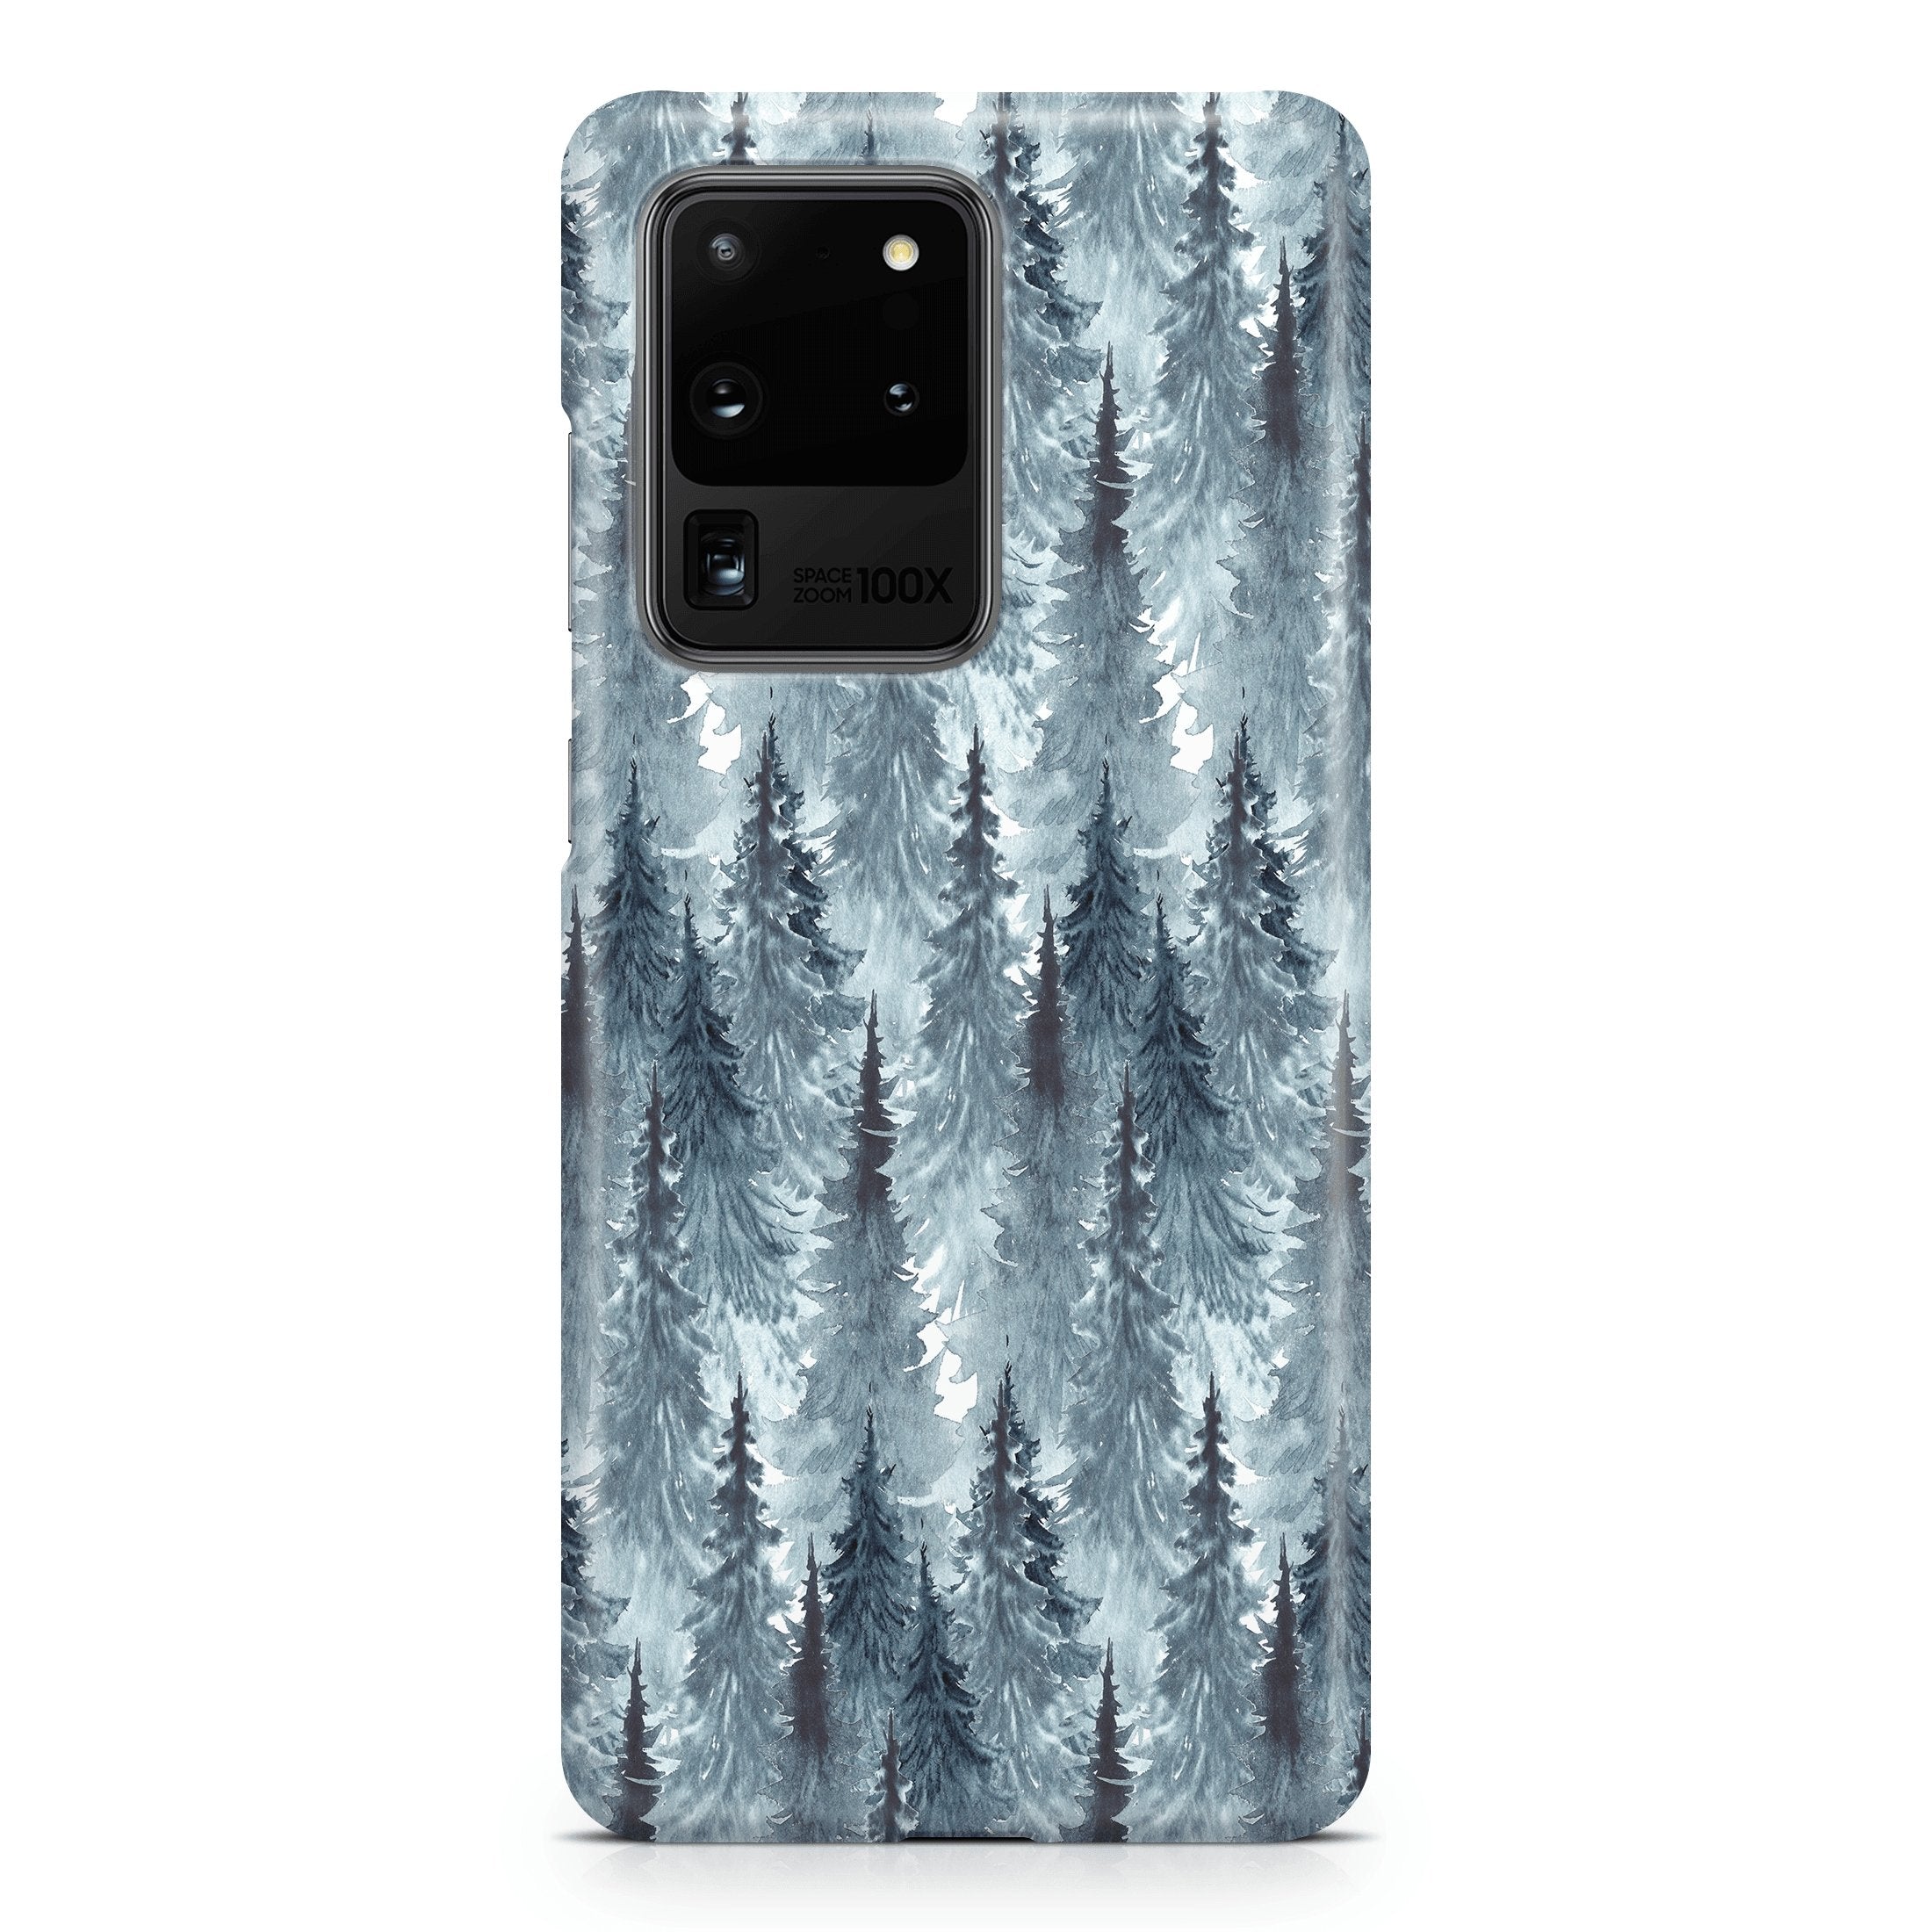 Winter Forest II - Samsung phone case designs by CaseSwagger